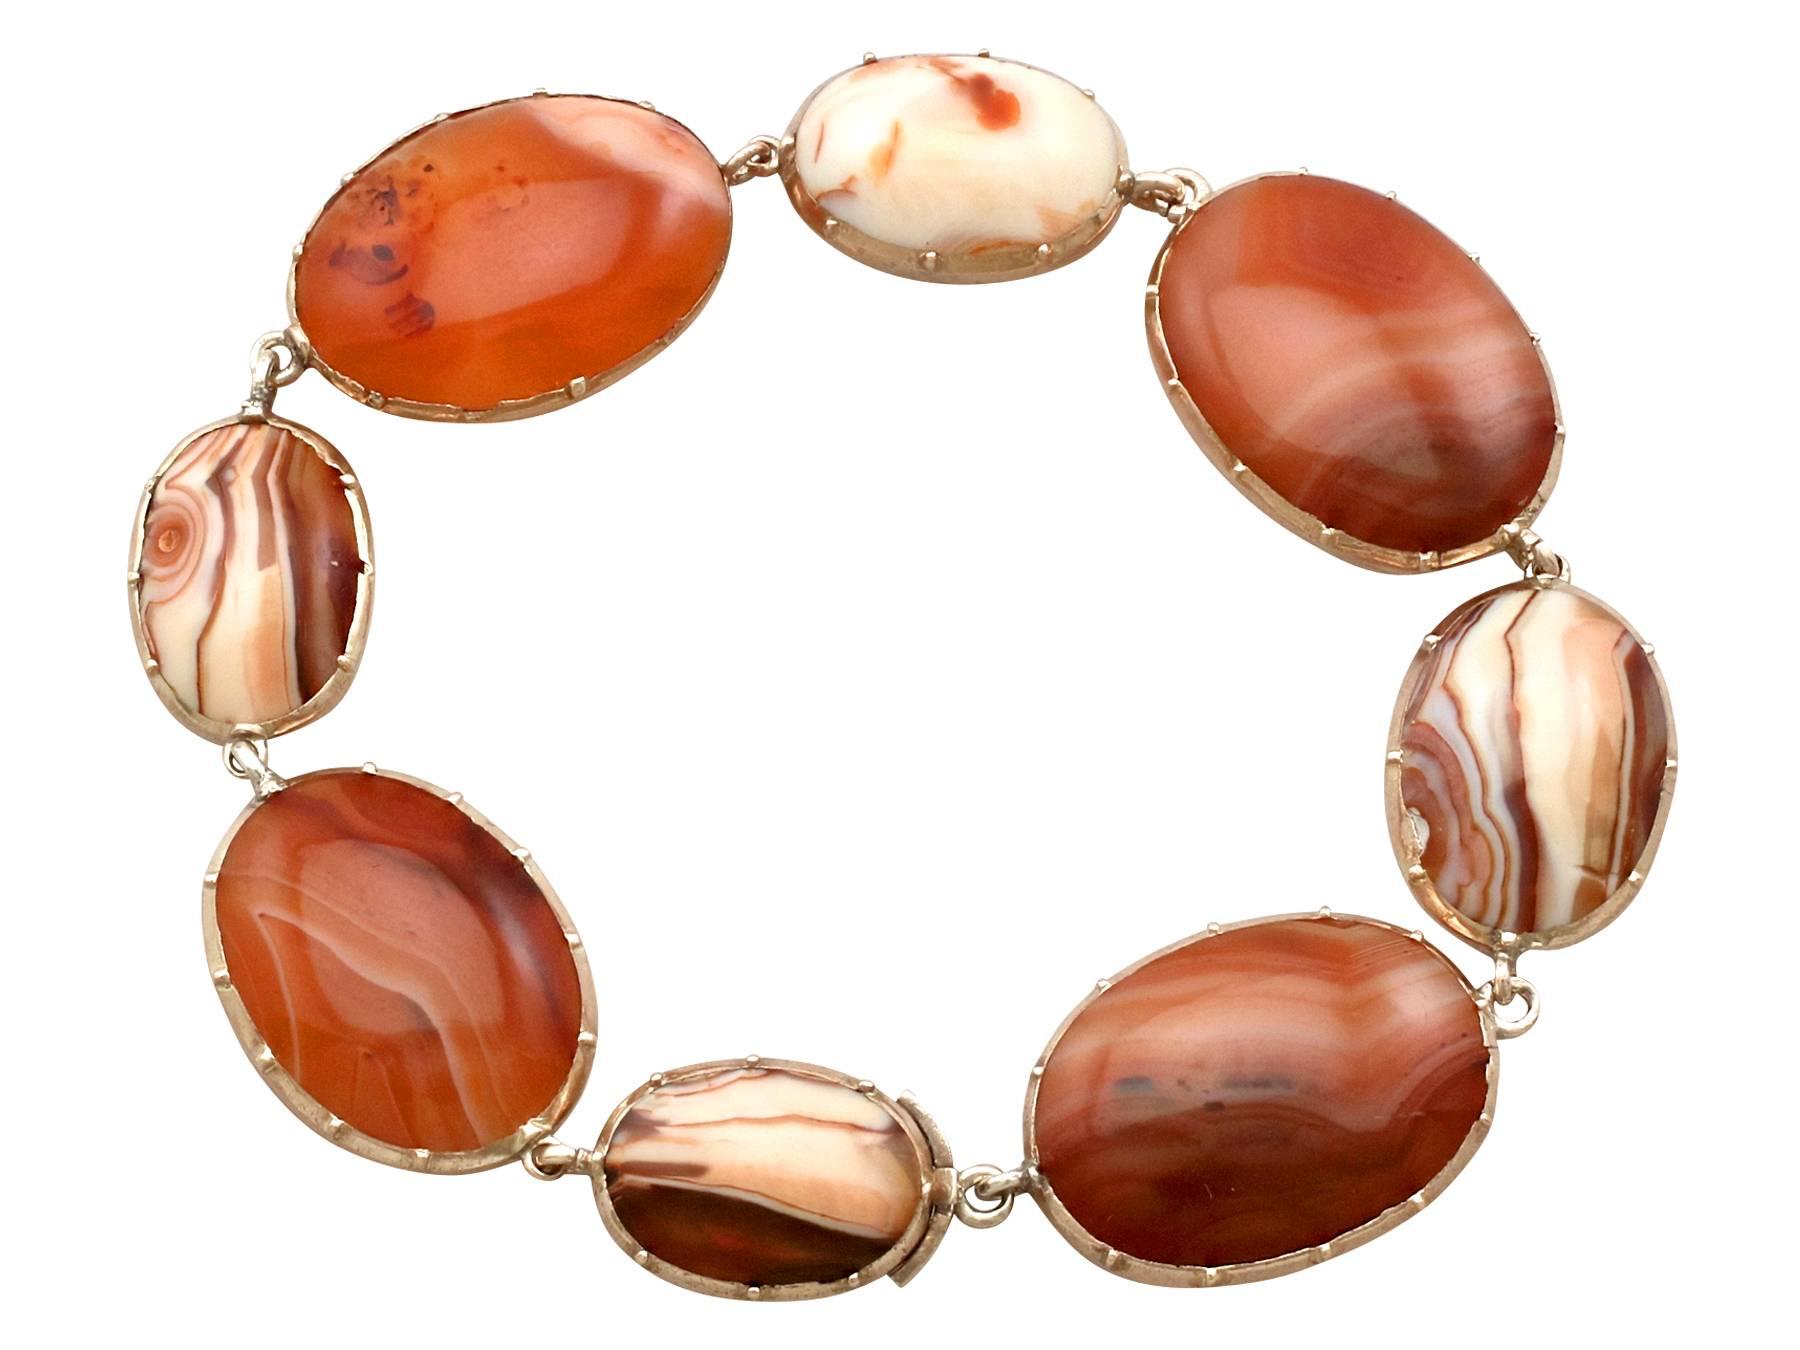 An impressive antique 1850s Victorian sardonyx and 9 karat yellow gold bracelet; part of our diverse antique jewelry and estate jewelry collections.

This fine and impressive antique cabochon cut agate bracelet has been crafted in 9k yellow